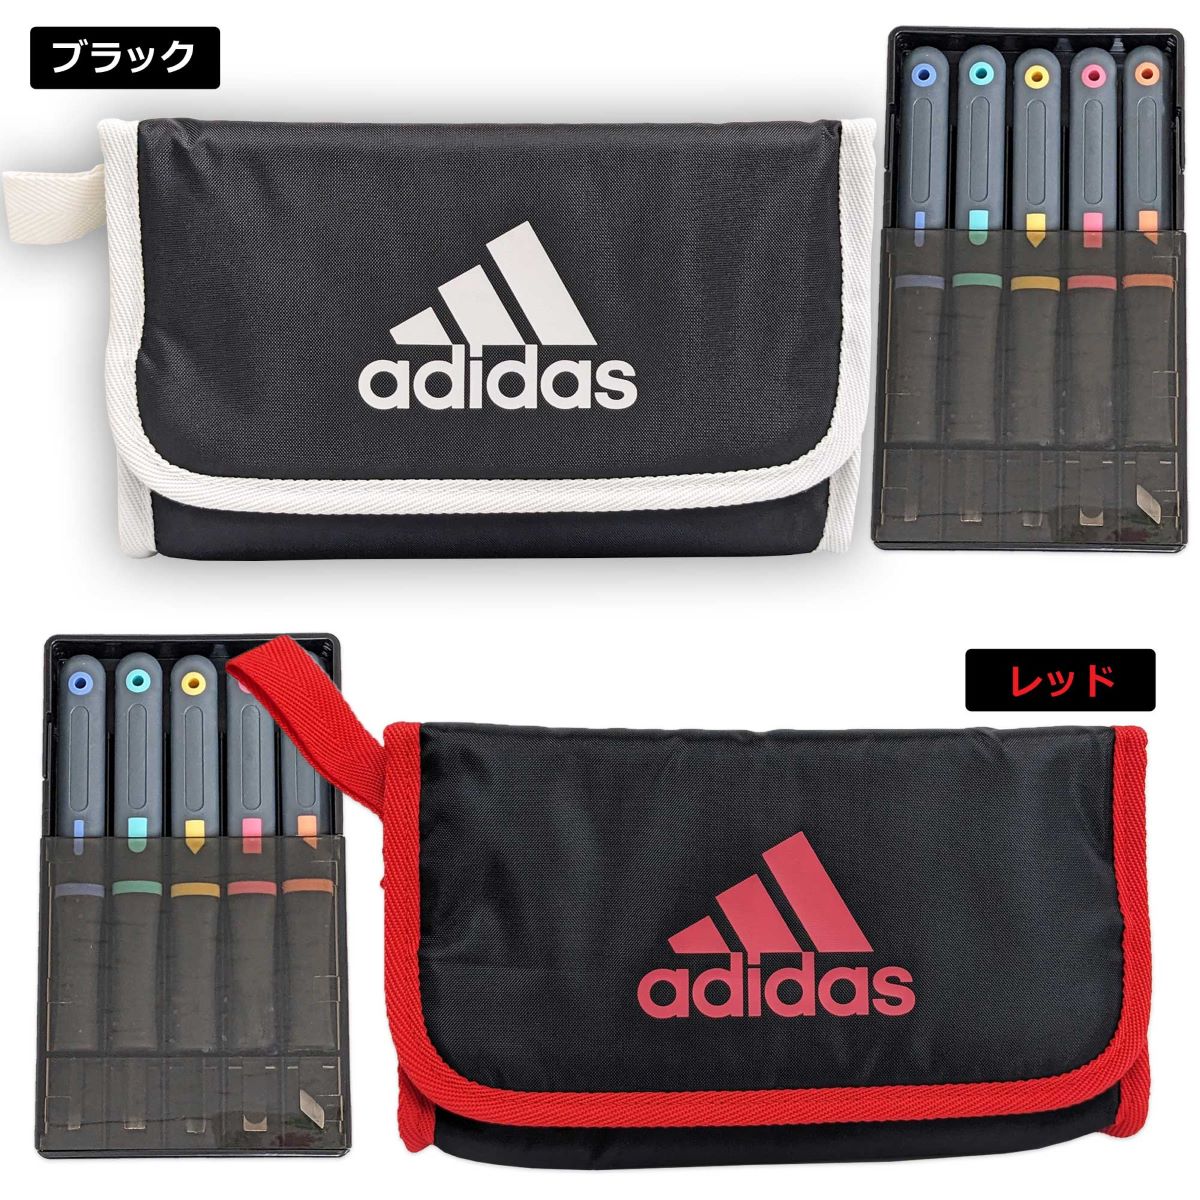  carving knife set / Adidas 2 color all steel blade . spring made Raver grip carving knife 5 pcs set set elementary school student carving knife case elementary school construction woodcut 